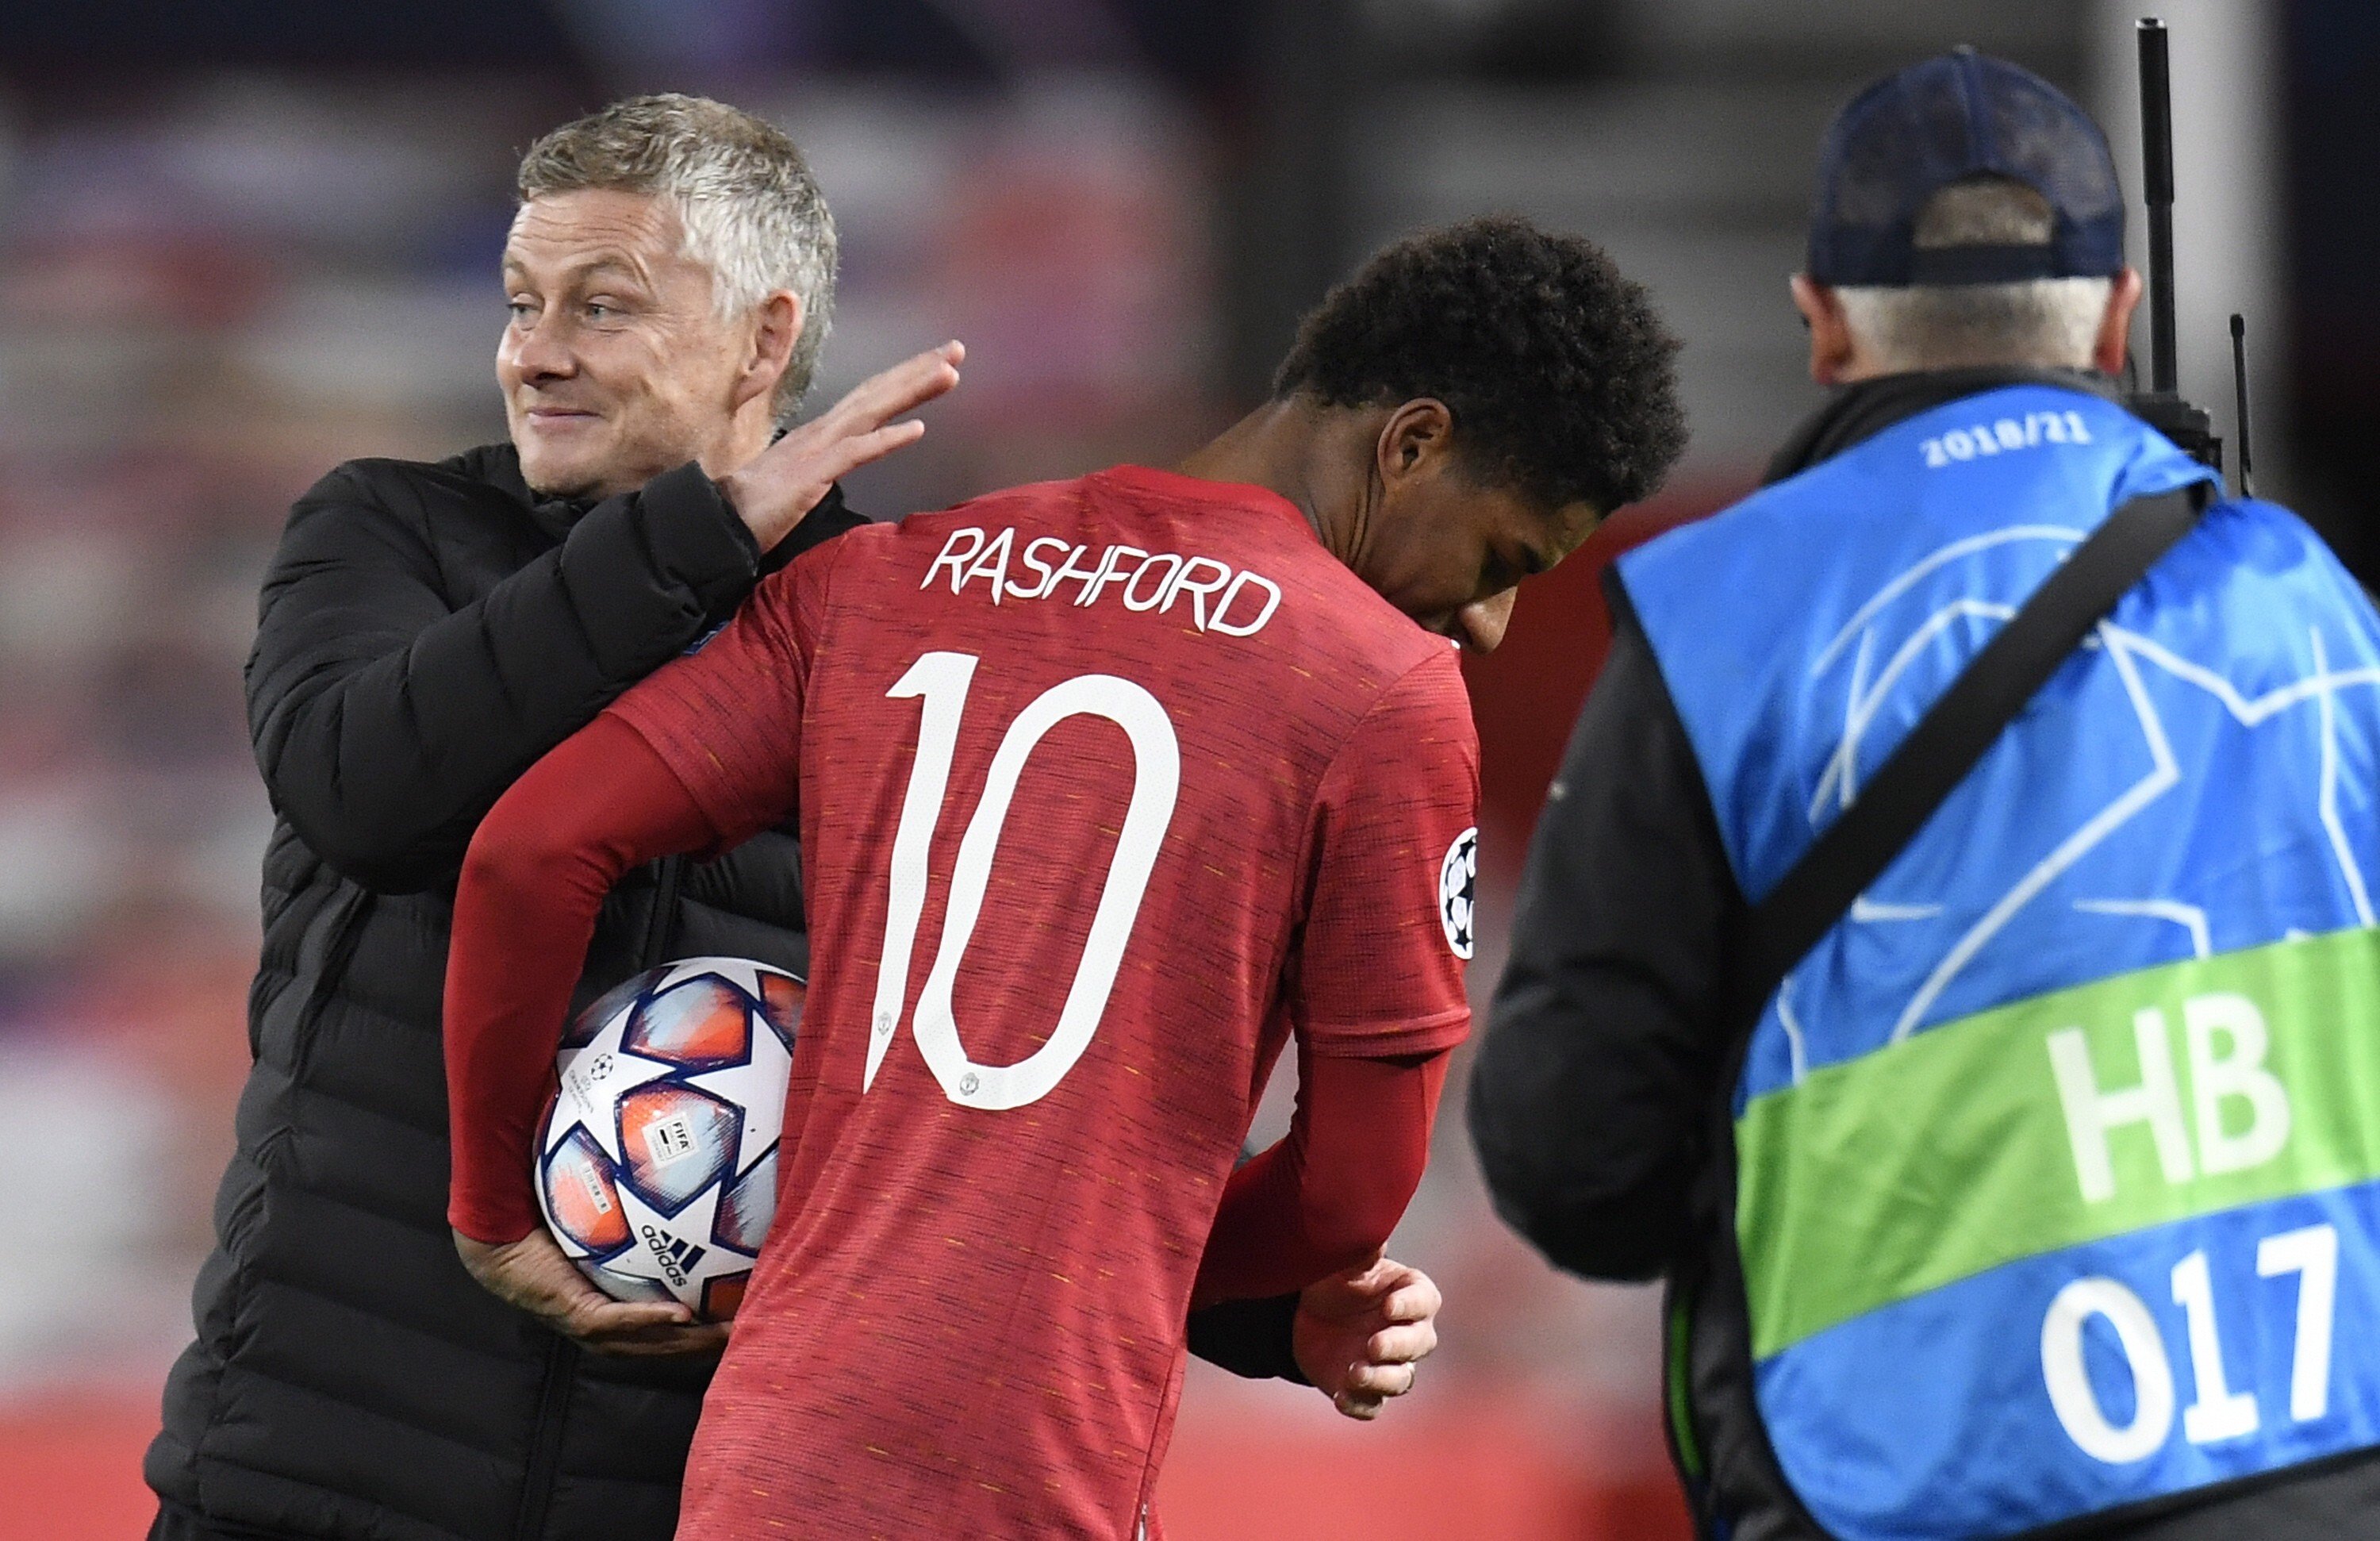 Marcus Rashford of Manchester United is congratulated by manager Ole Gunnar Solskjaer after their Uefa Champions League victory against RB Leipzig. Photo: EPA